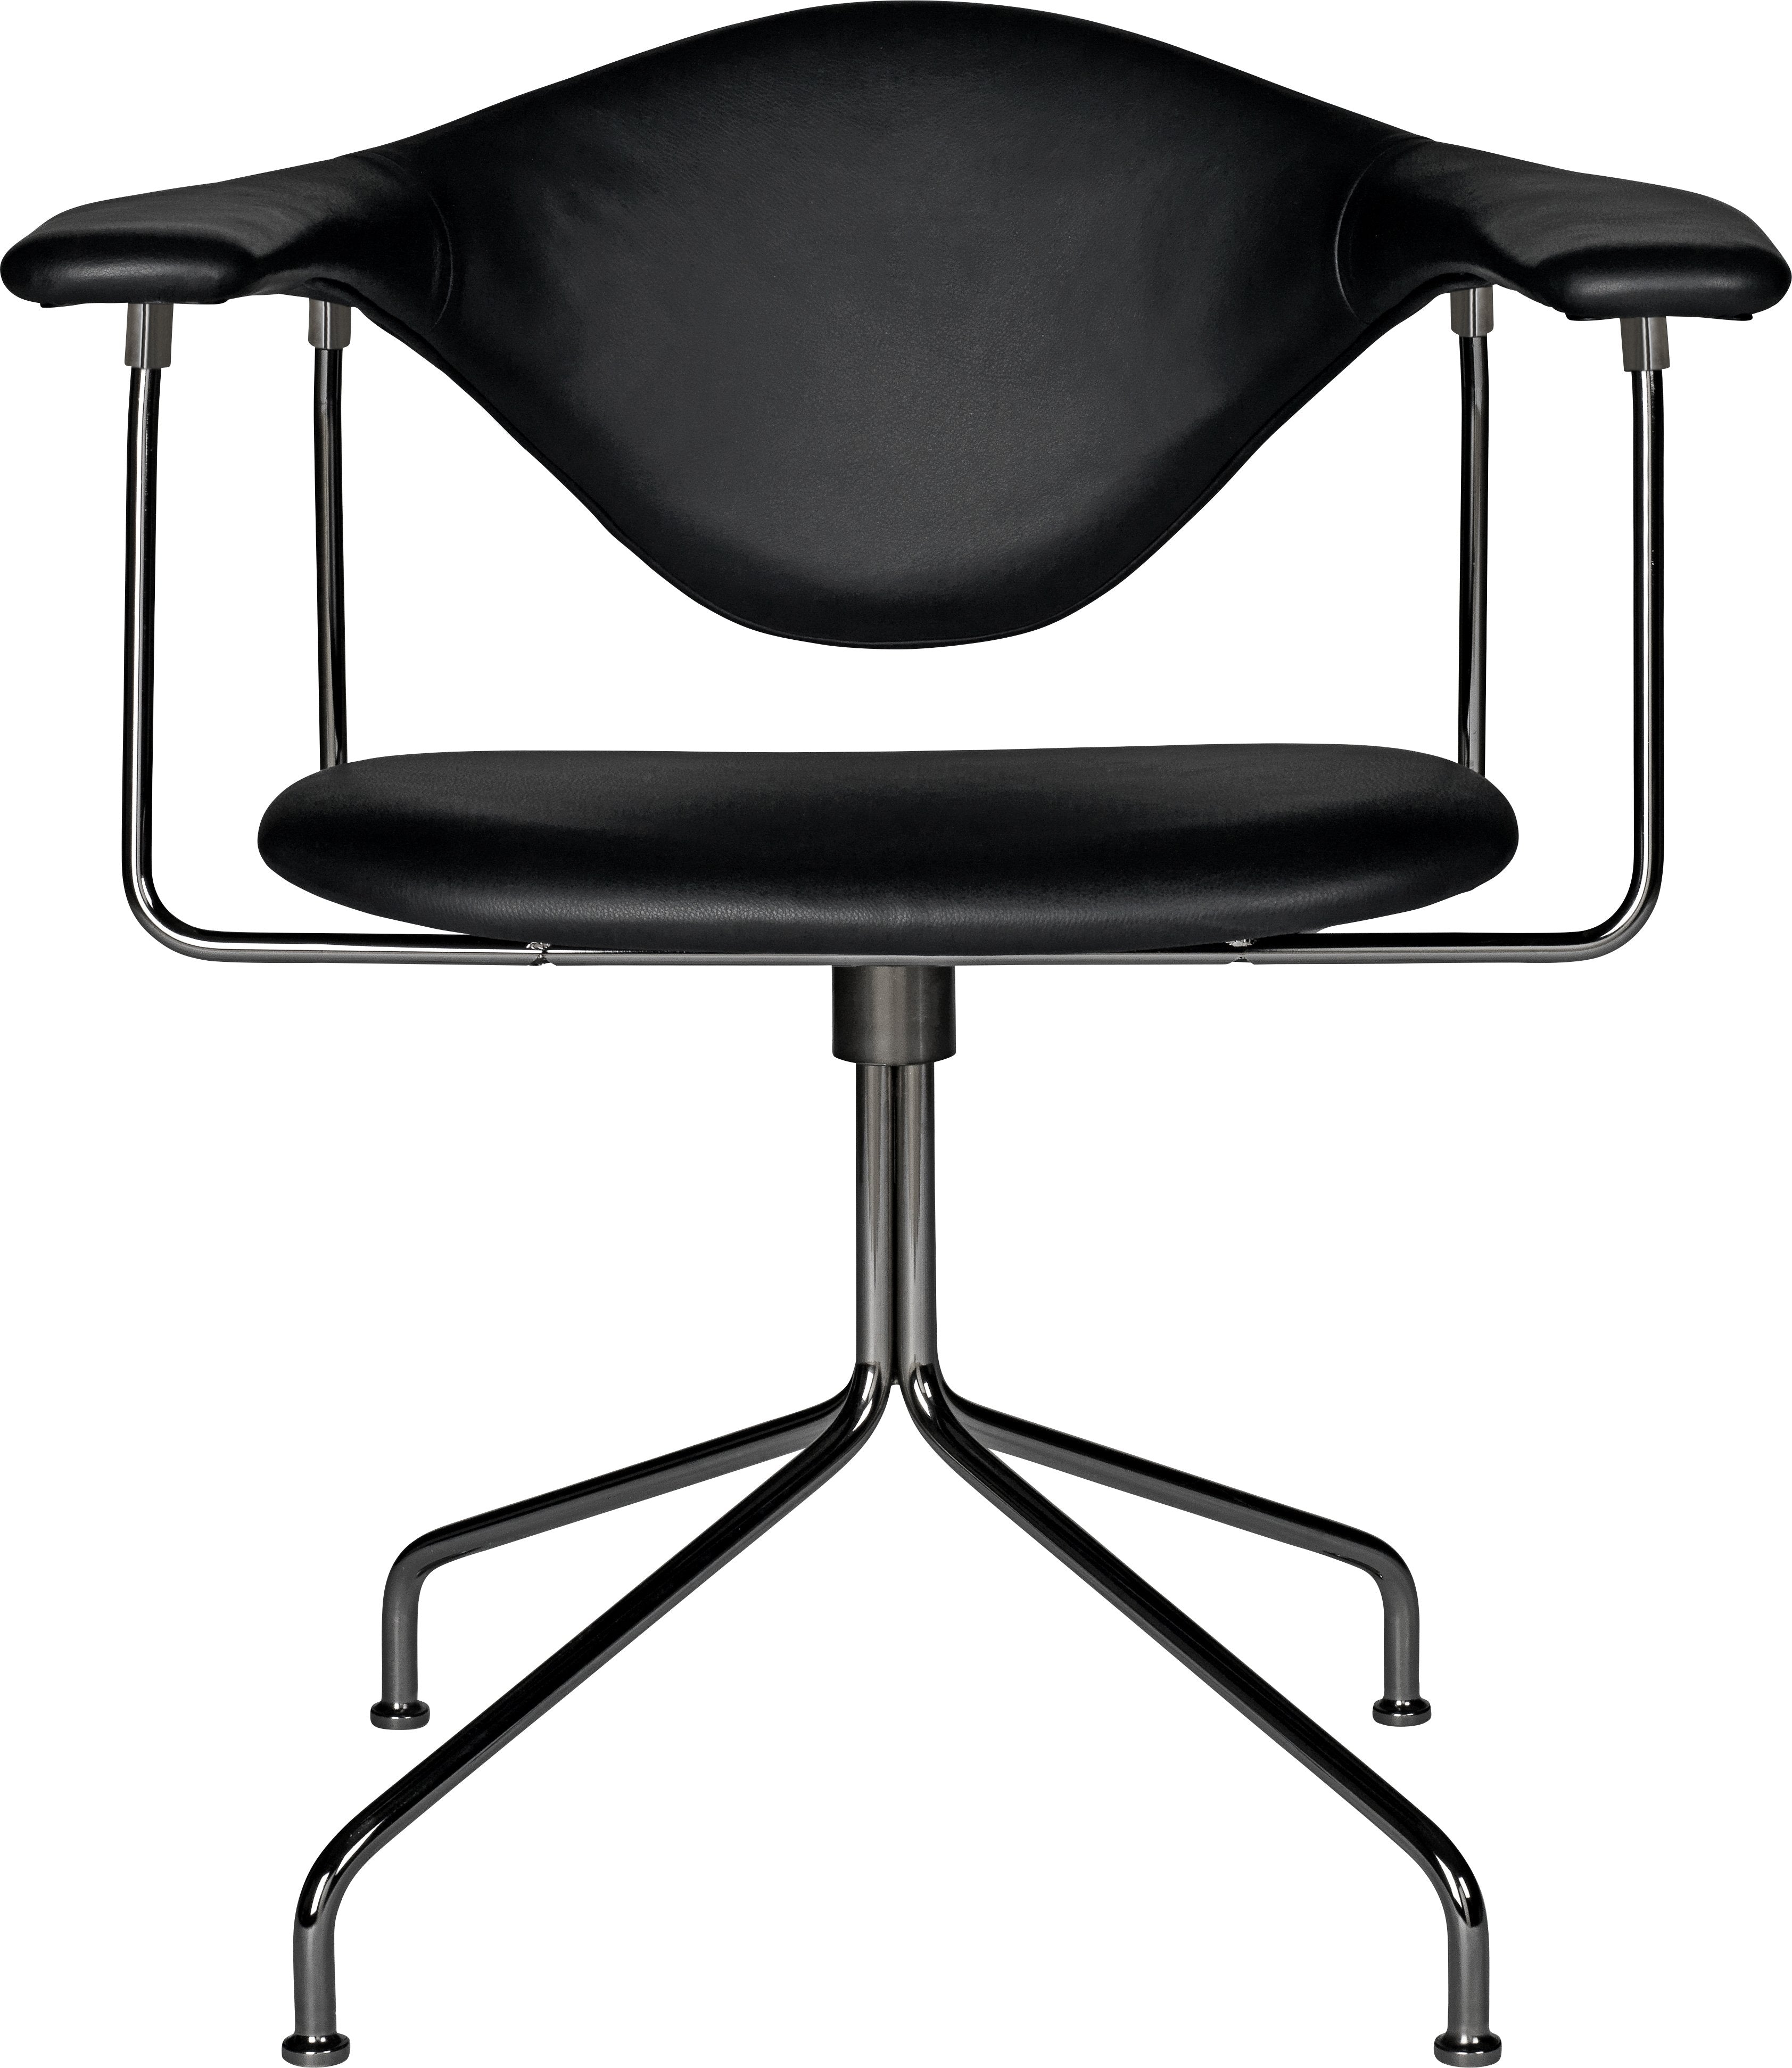 Masculo Meeting Chair